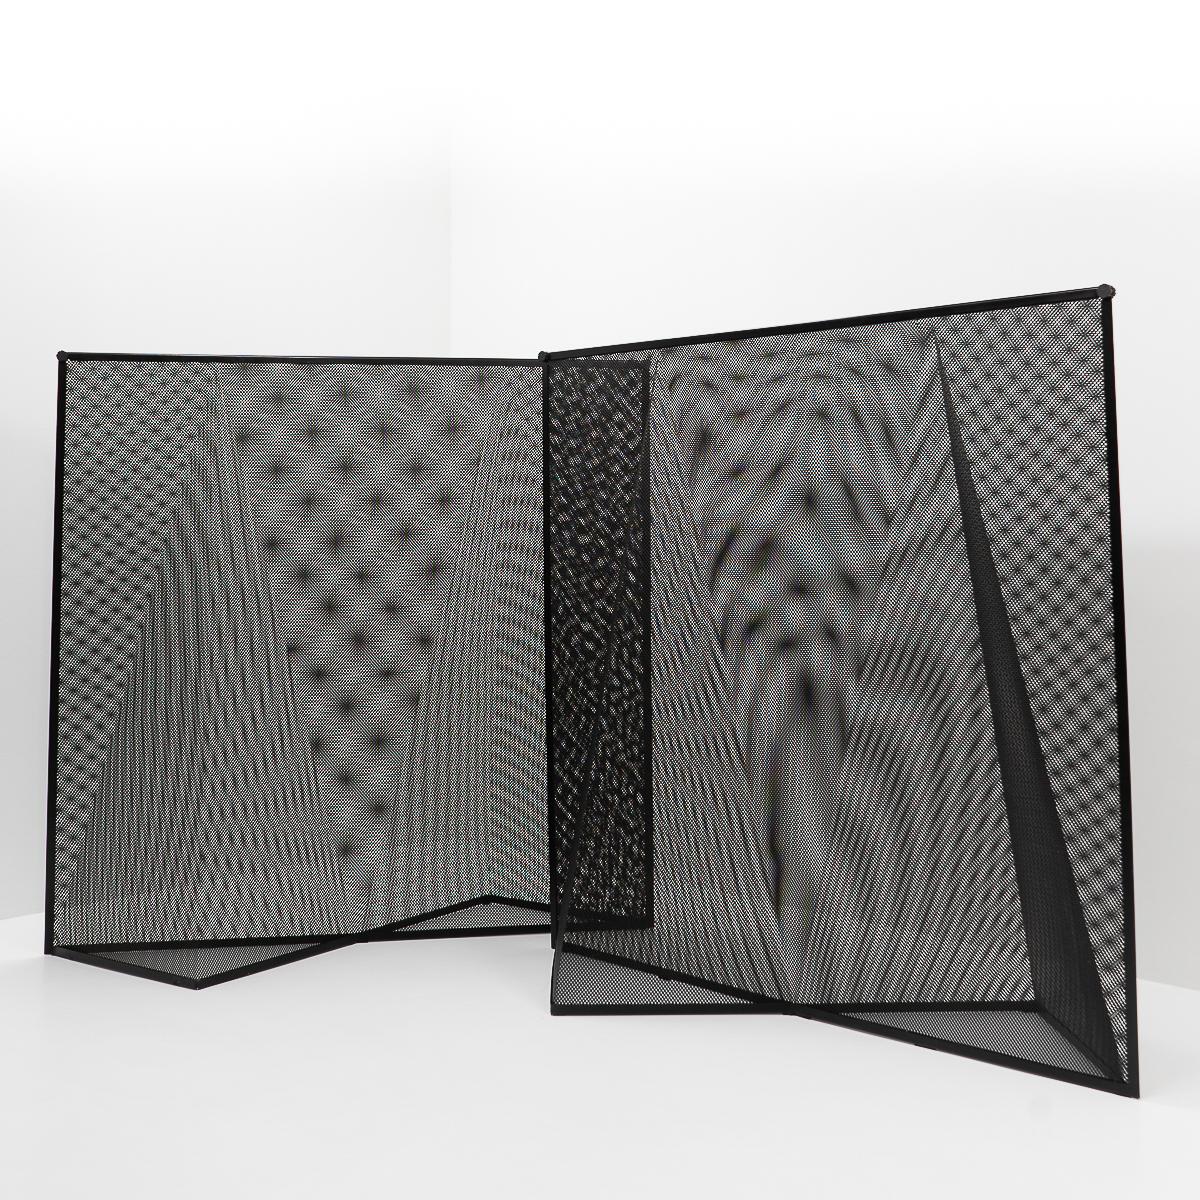 Postmodern Room Dividers / Paravents, Nilla Rosa by Mario Botta for Alias, 1980s For Sale 6